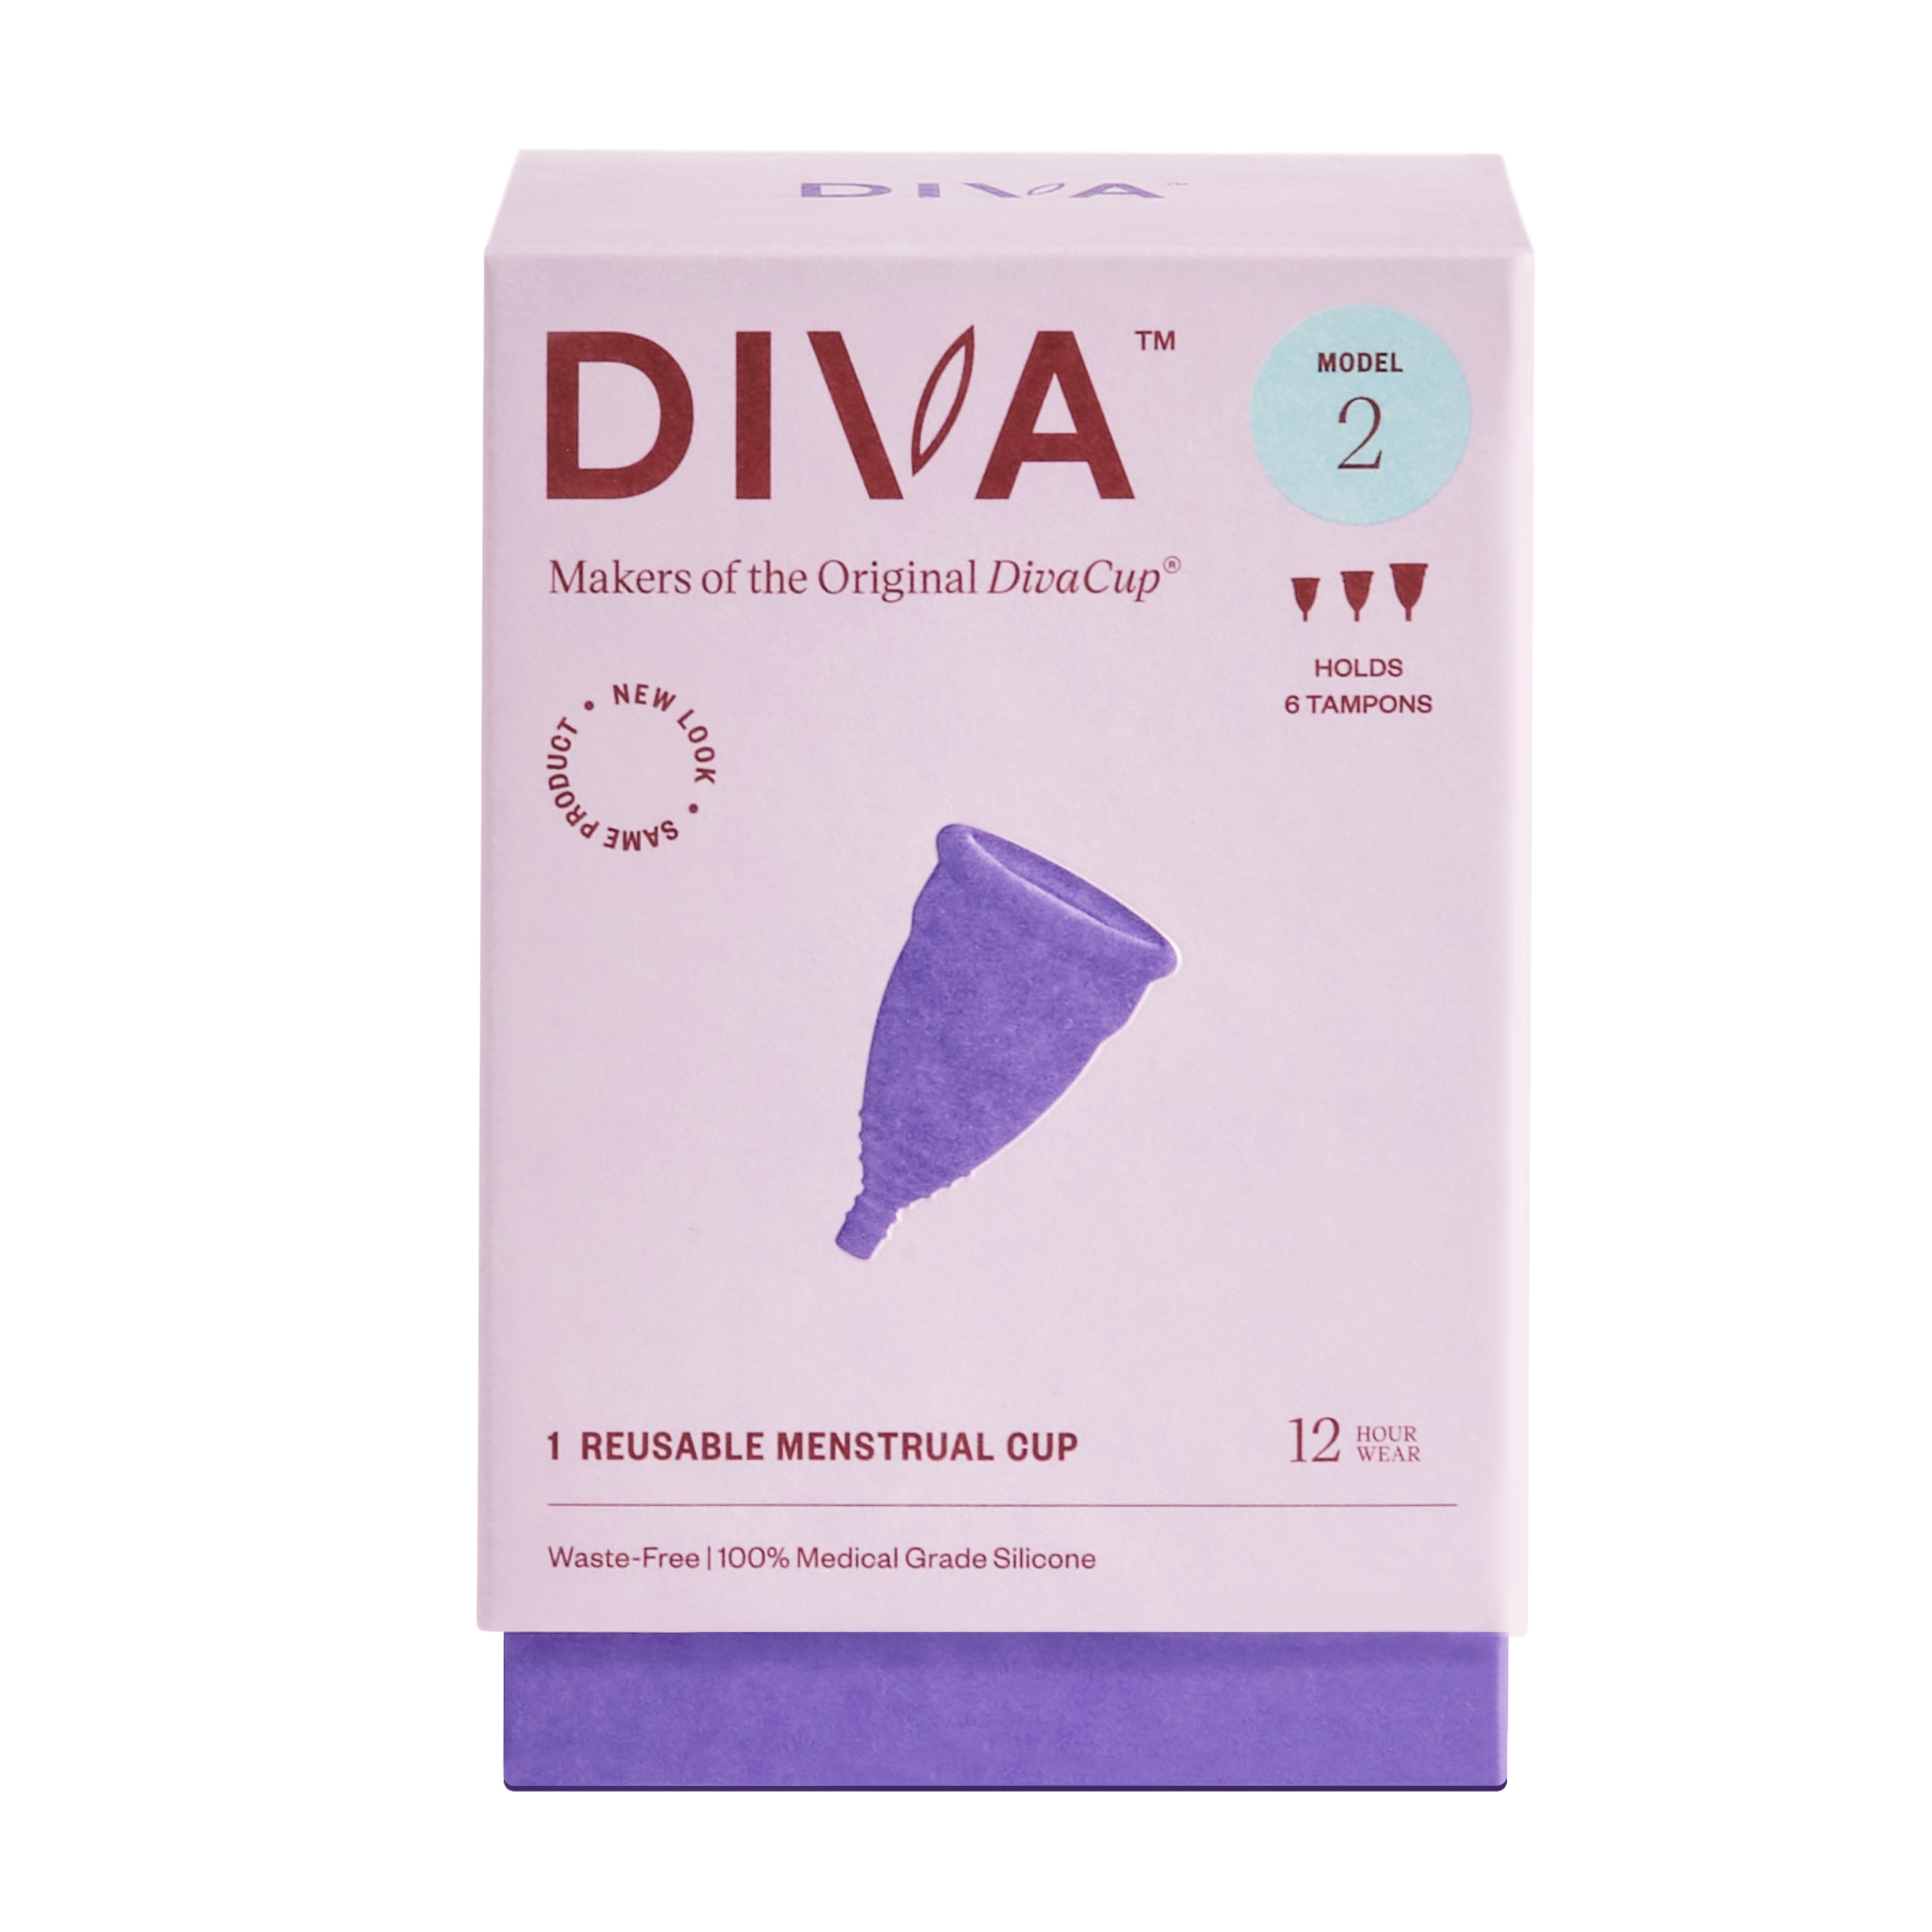 DIVA Cup Model 2 Reusable Menstrual Cup, For Post-Partum & Ages 35+ - image 1 of 7